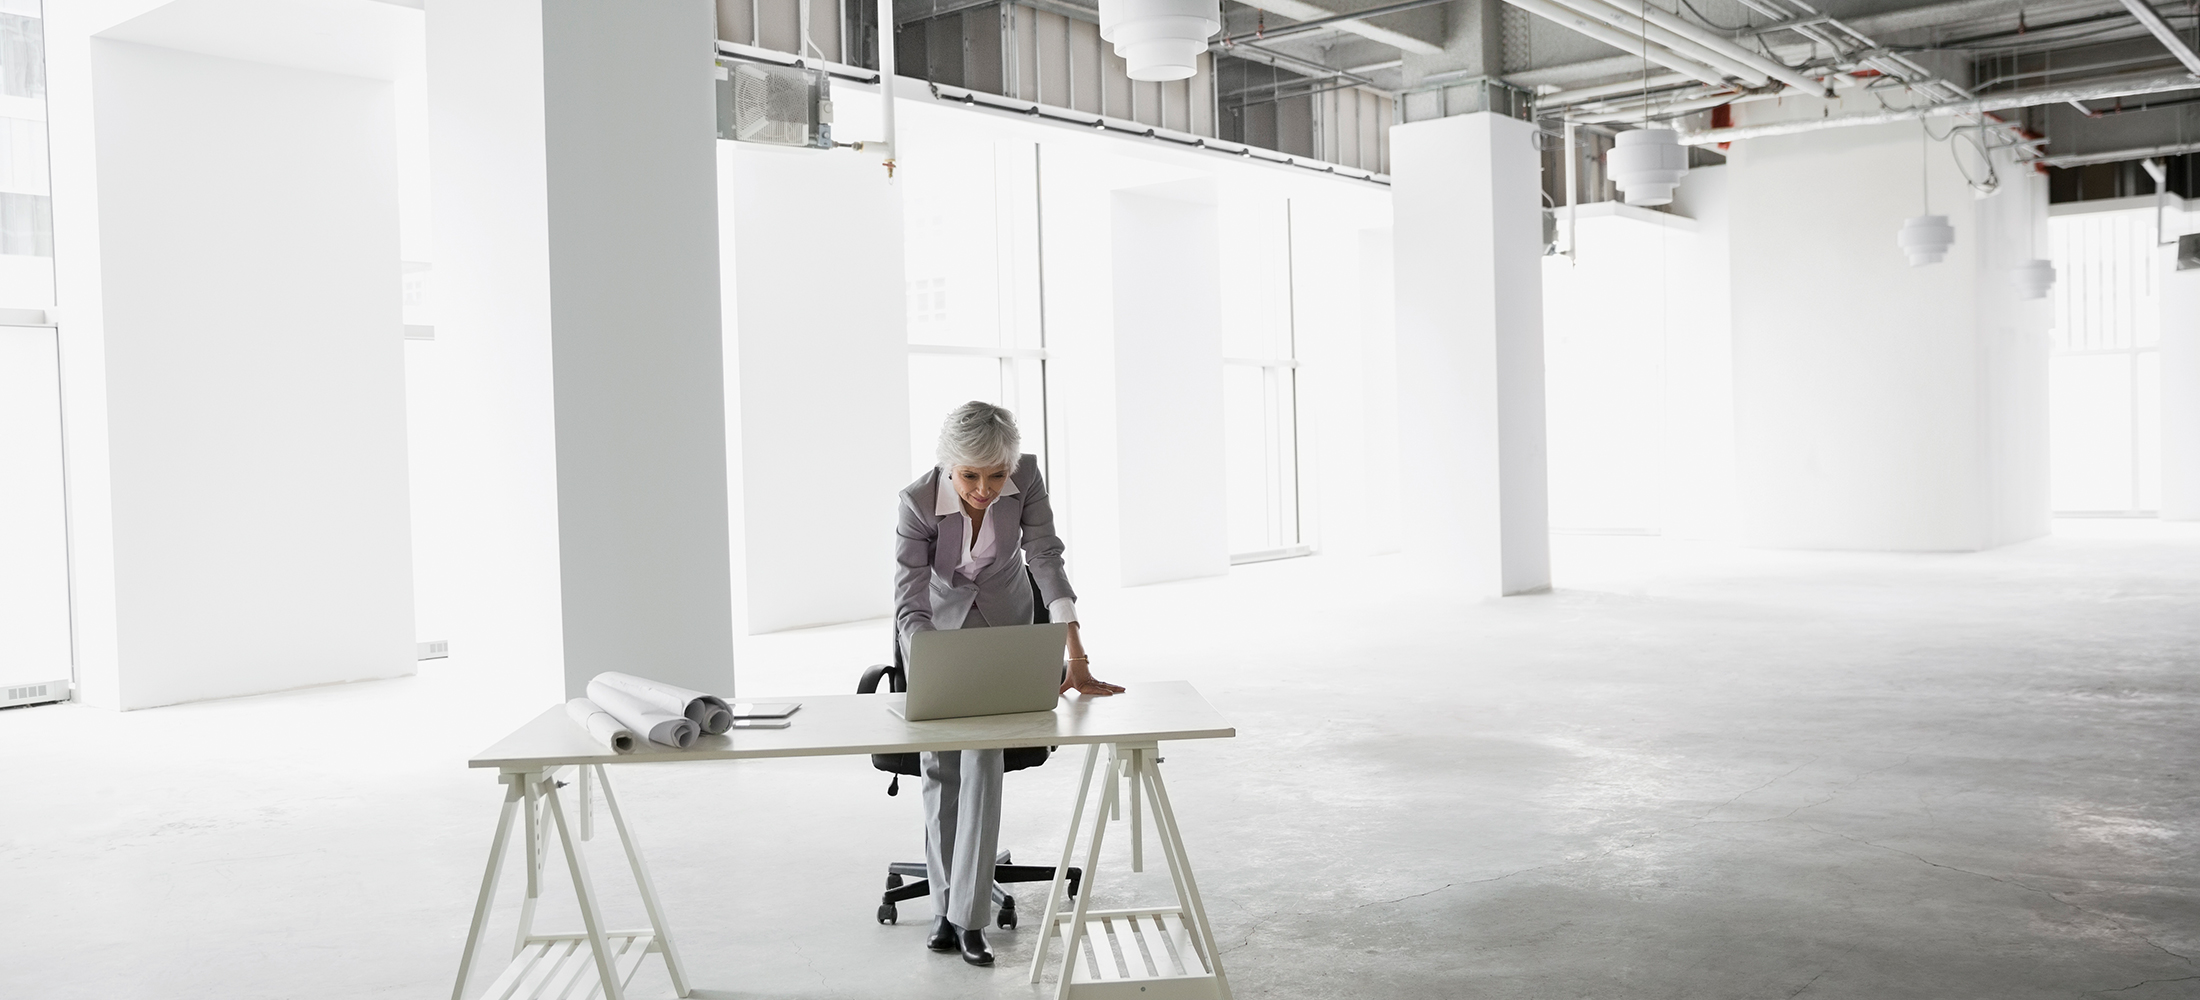 Architect working at laptop in empty office